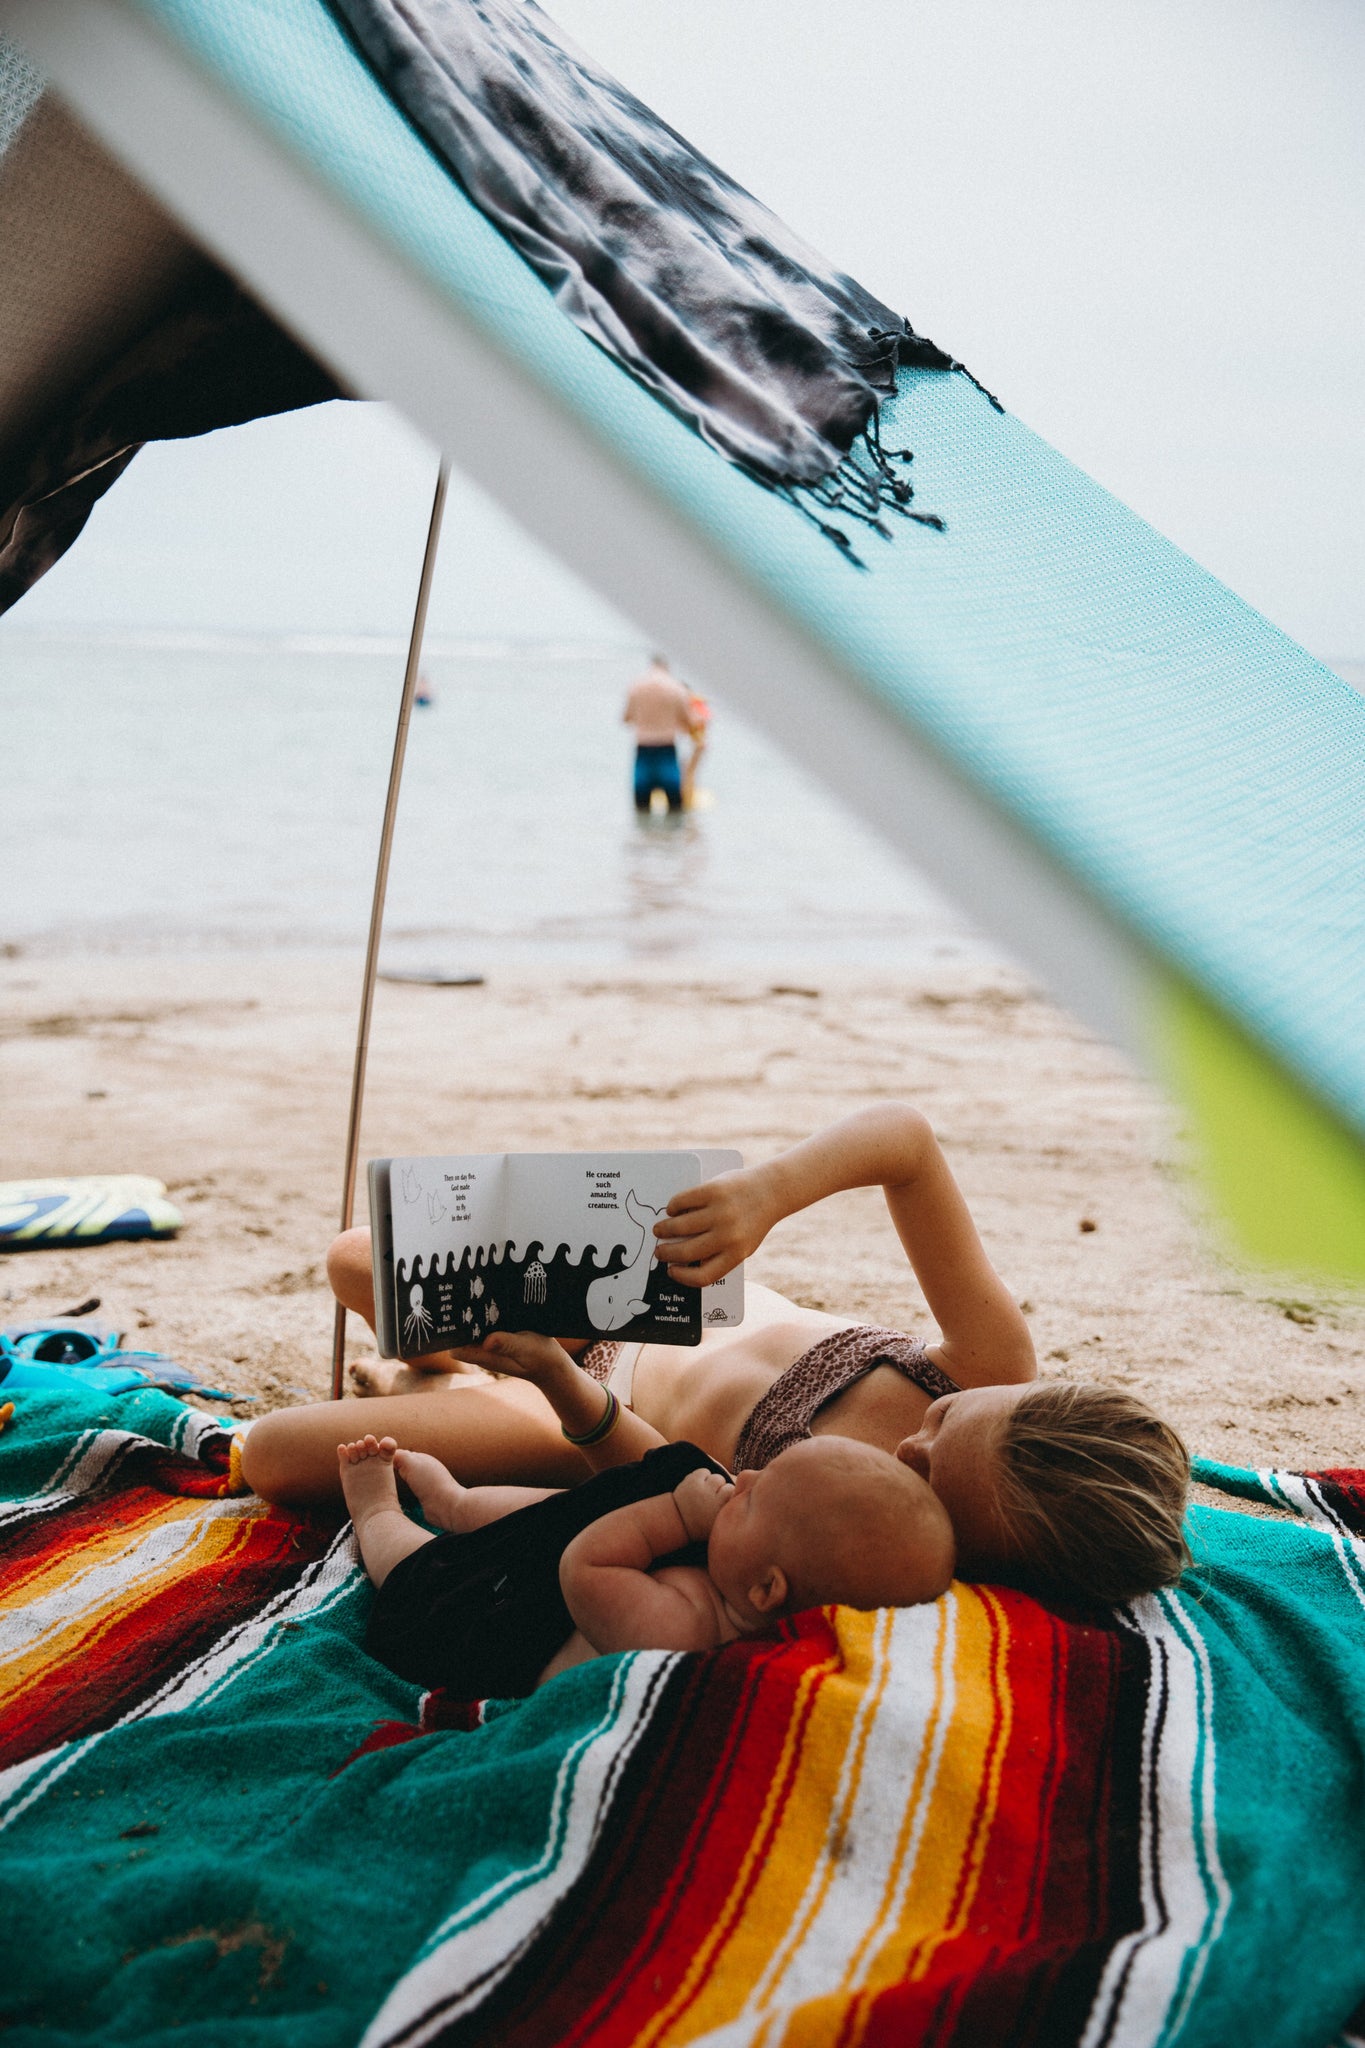 Beach and lake life vibes with sky and arrow products and accessories. Help someone in need.